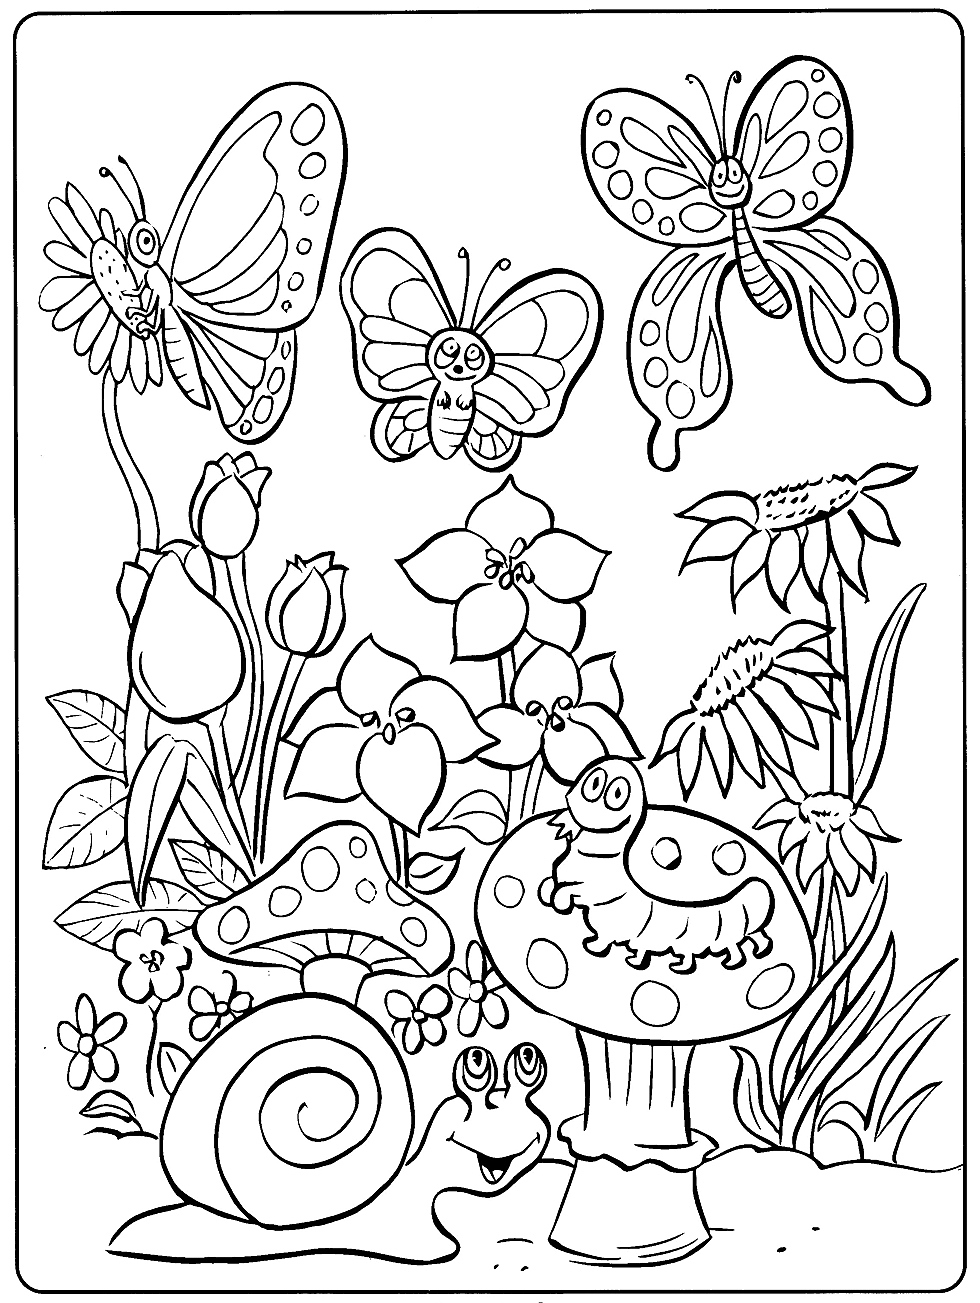 baby-animal-coloring-pages-realistic-coloring-pages